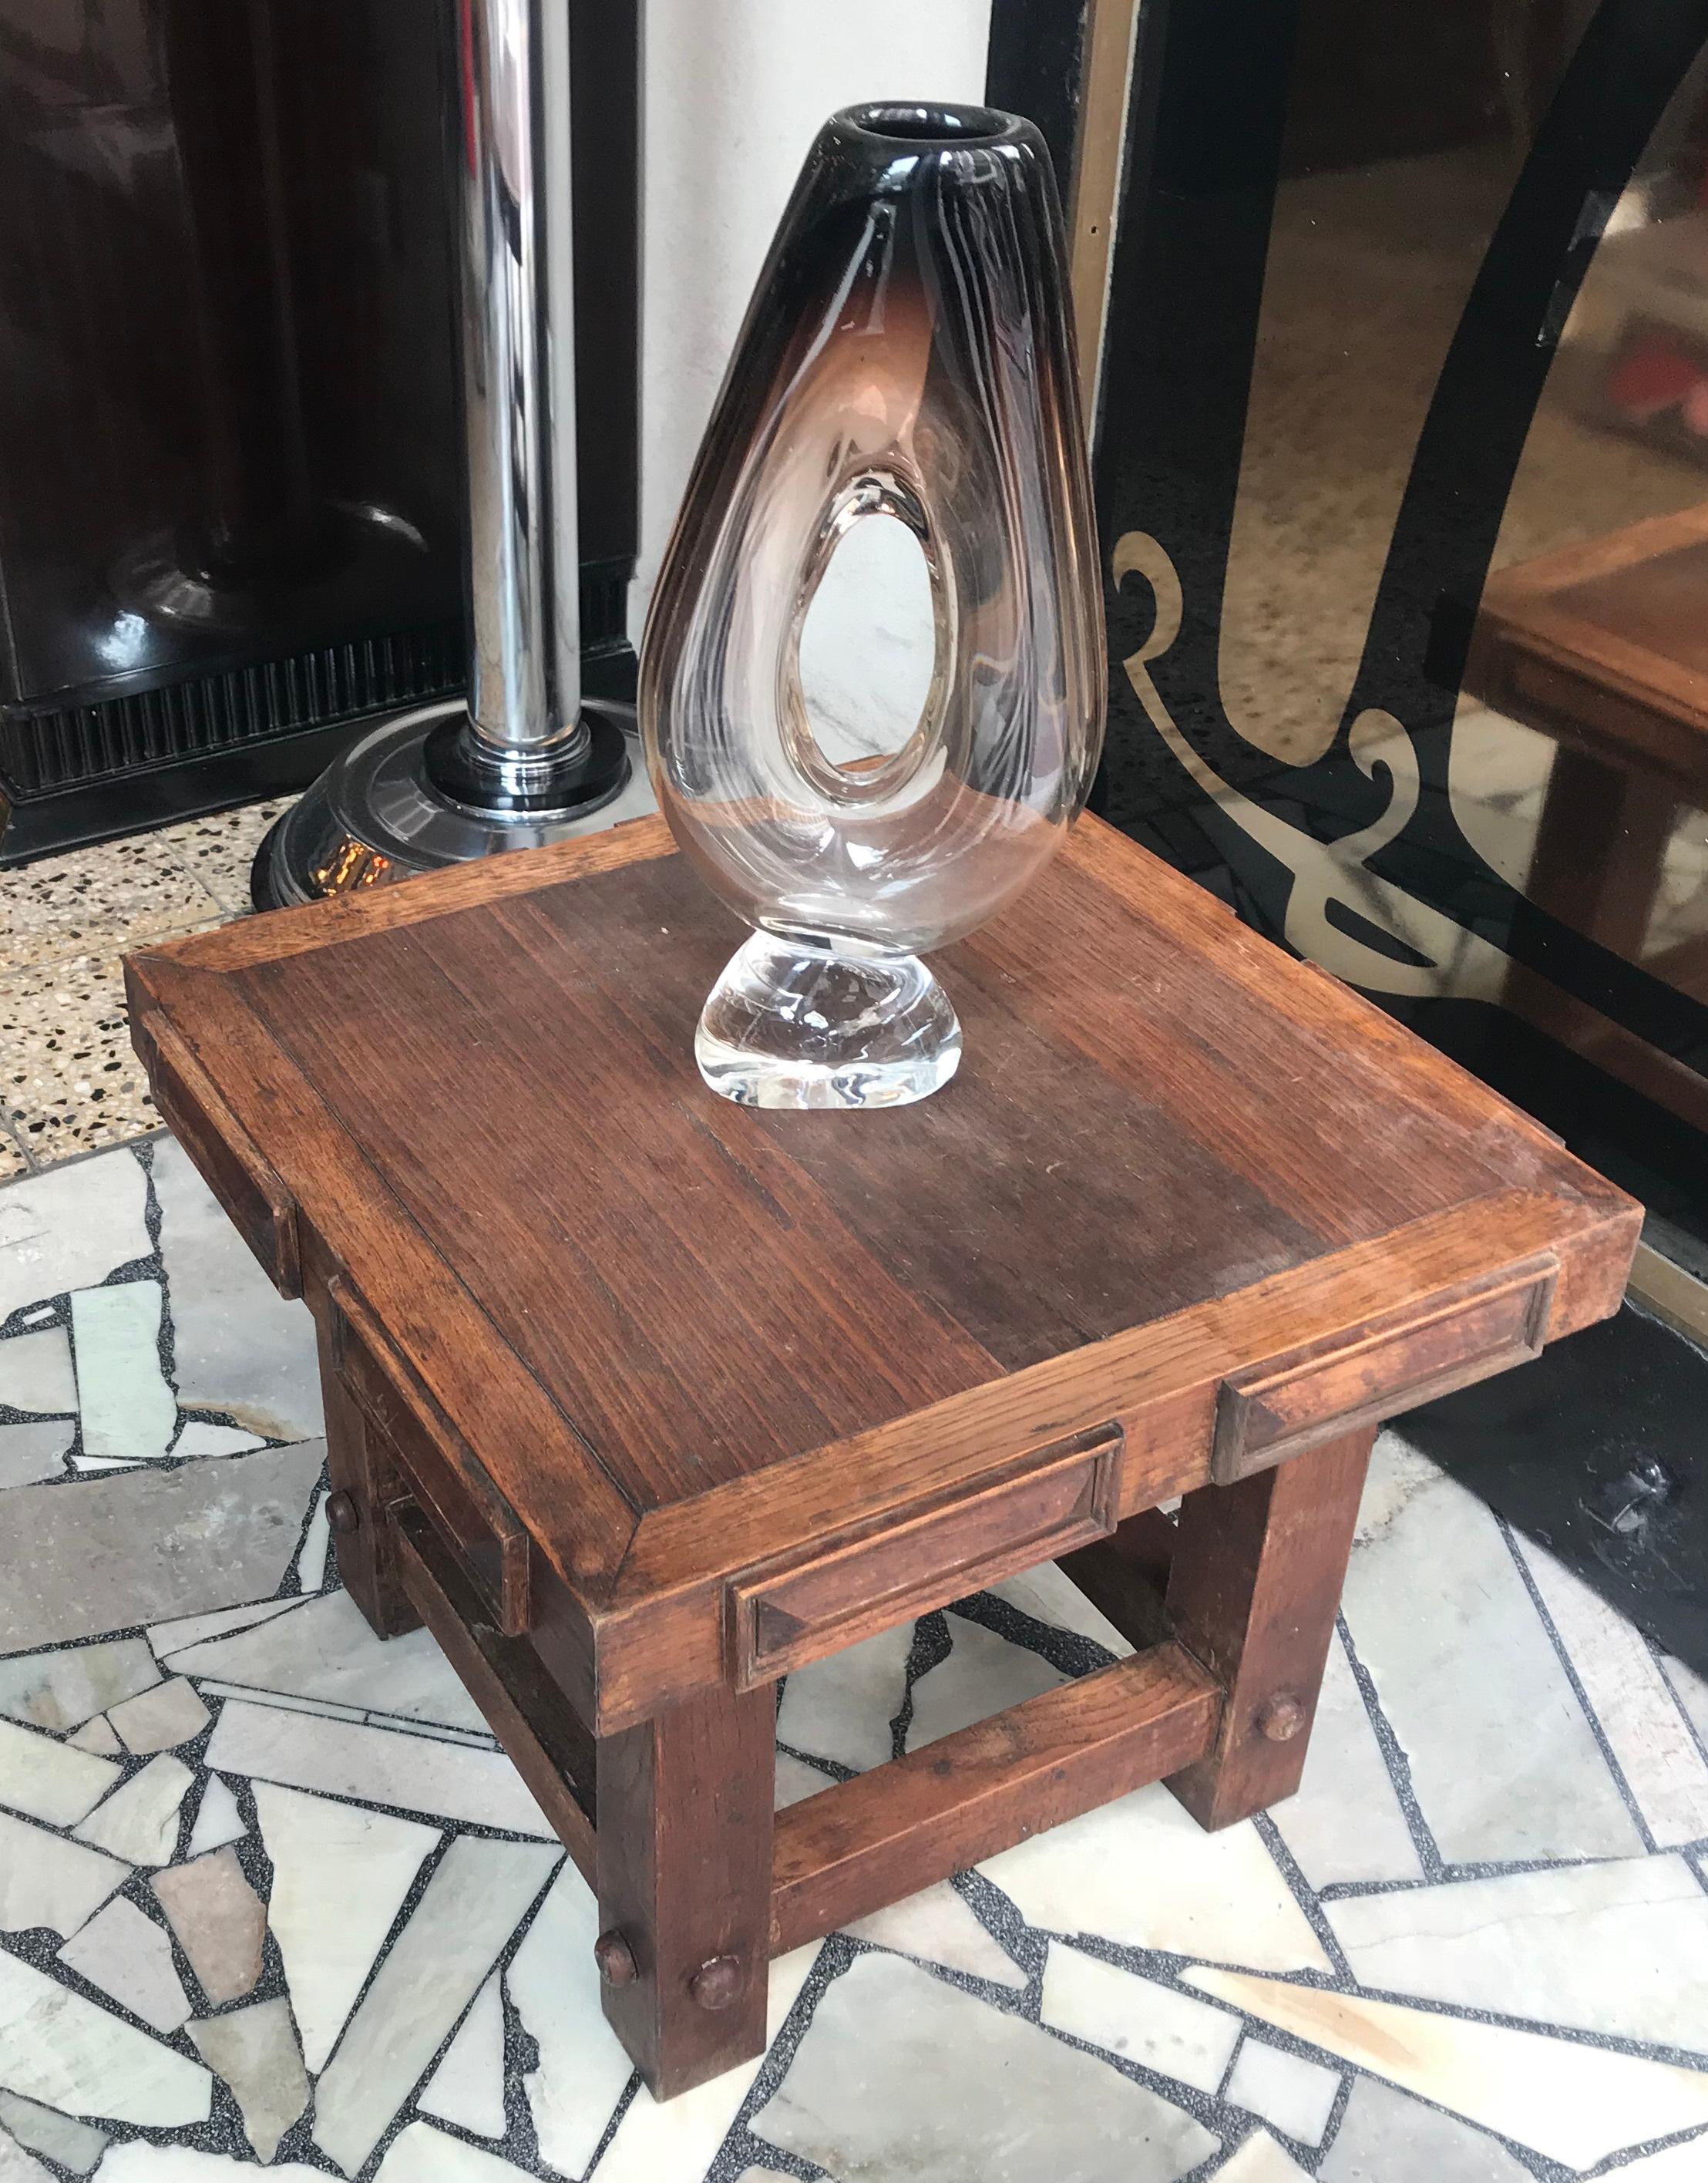 Table

Material: Wood
France
We have specialized in the sale of Art Deco and Art Nouveau and Vintage styles since 1982. If you have any questions we are at your disposal.
Pushing the button that reads 'View All From Seller'. And you can see more